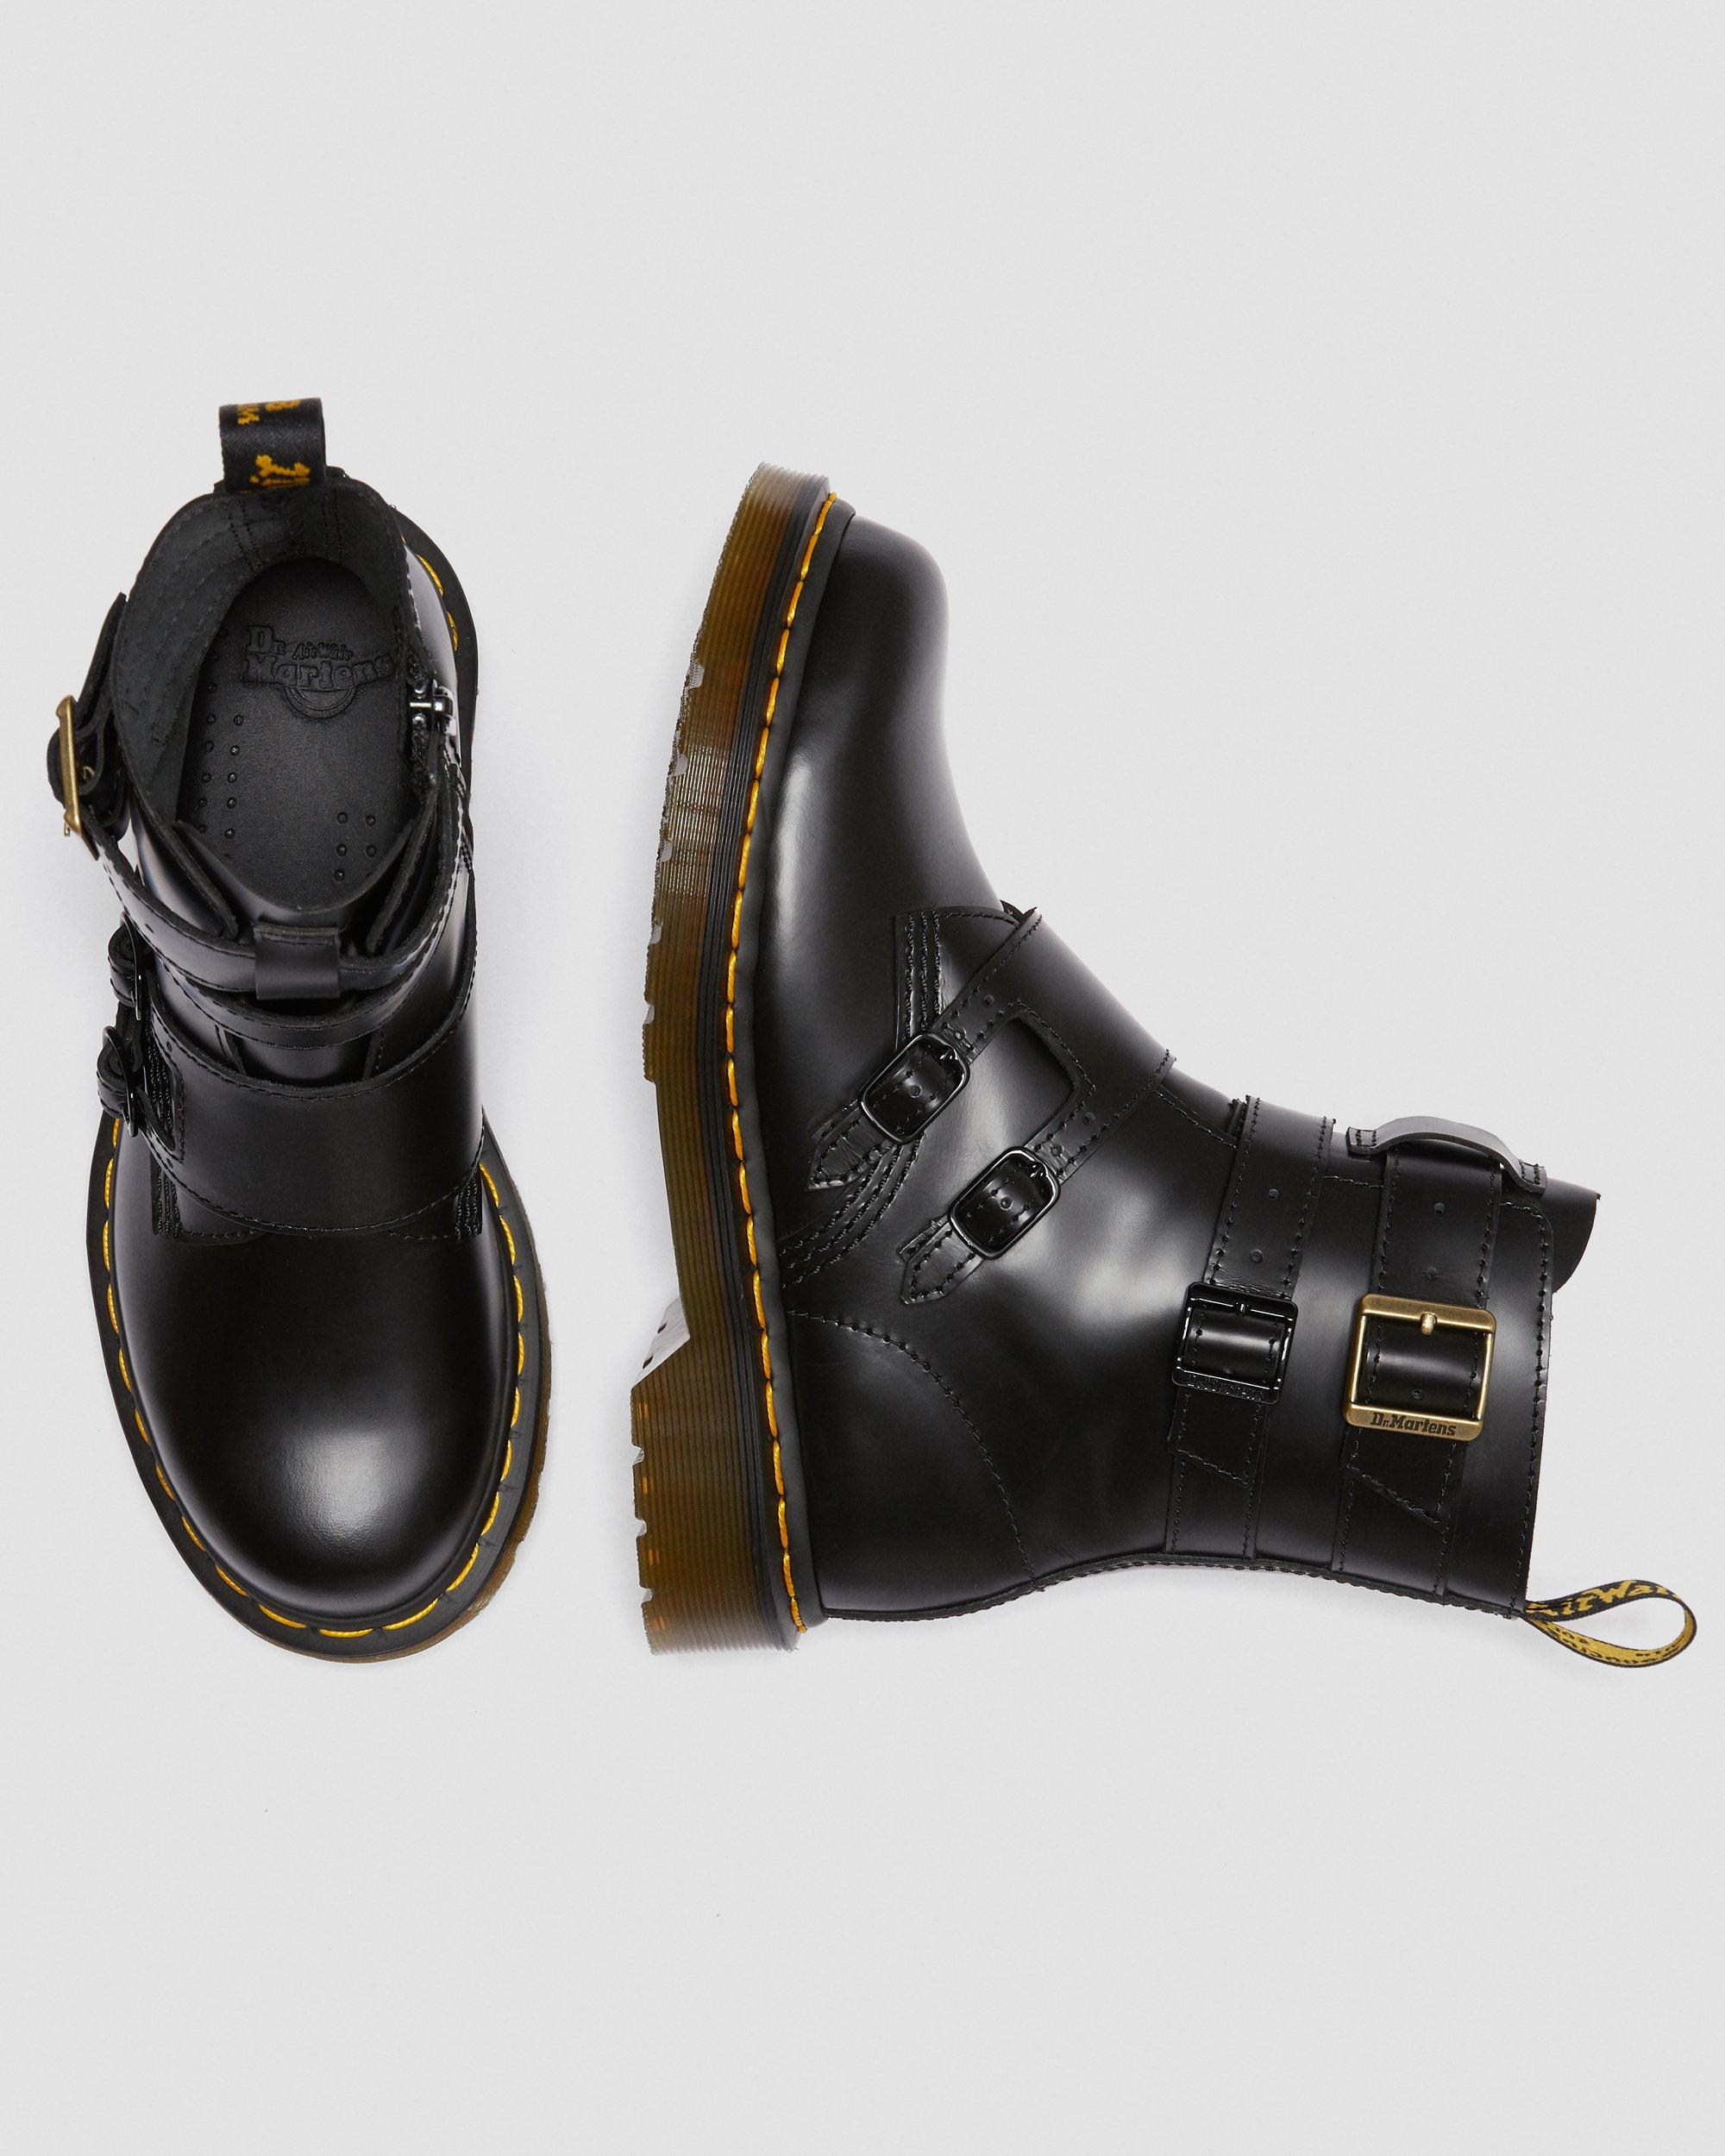 BLAKE II LEATHER BUCKLE BOOTS Dr. Martens